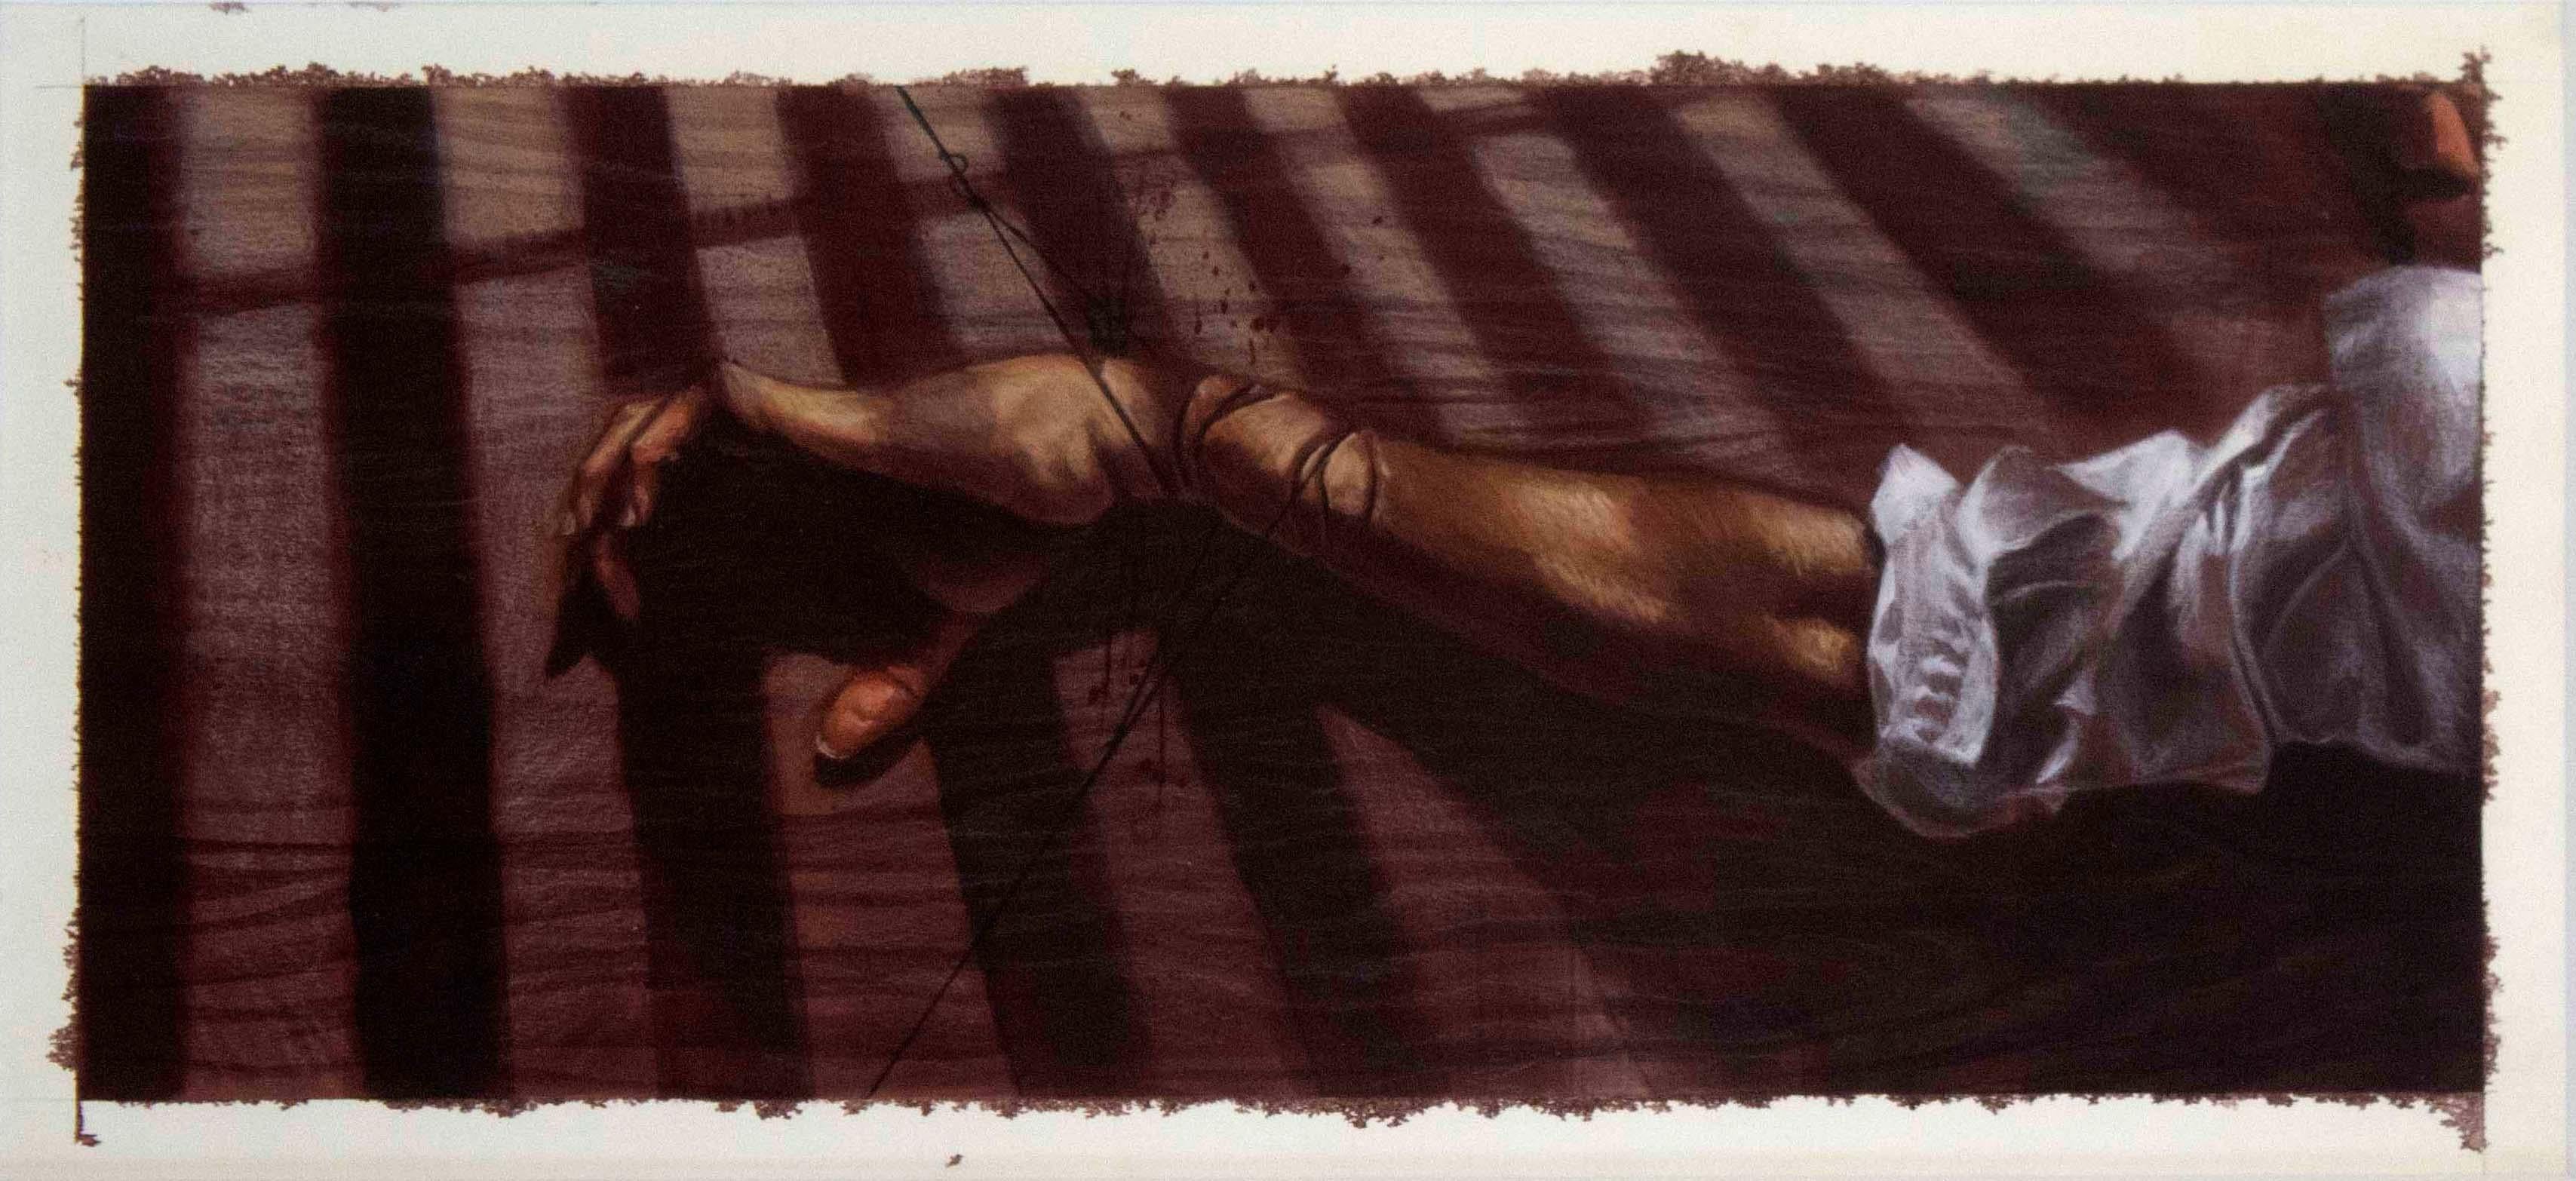 For your consideration is beautiful yet haunting contemporary pastel and watercolor depicting an arm wrapped in string by an unknown artist. 


This drawing was acquired from a curator and gallery owner from Los Angeles with a collection of